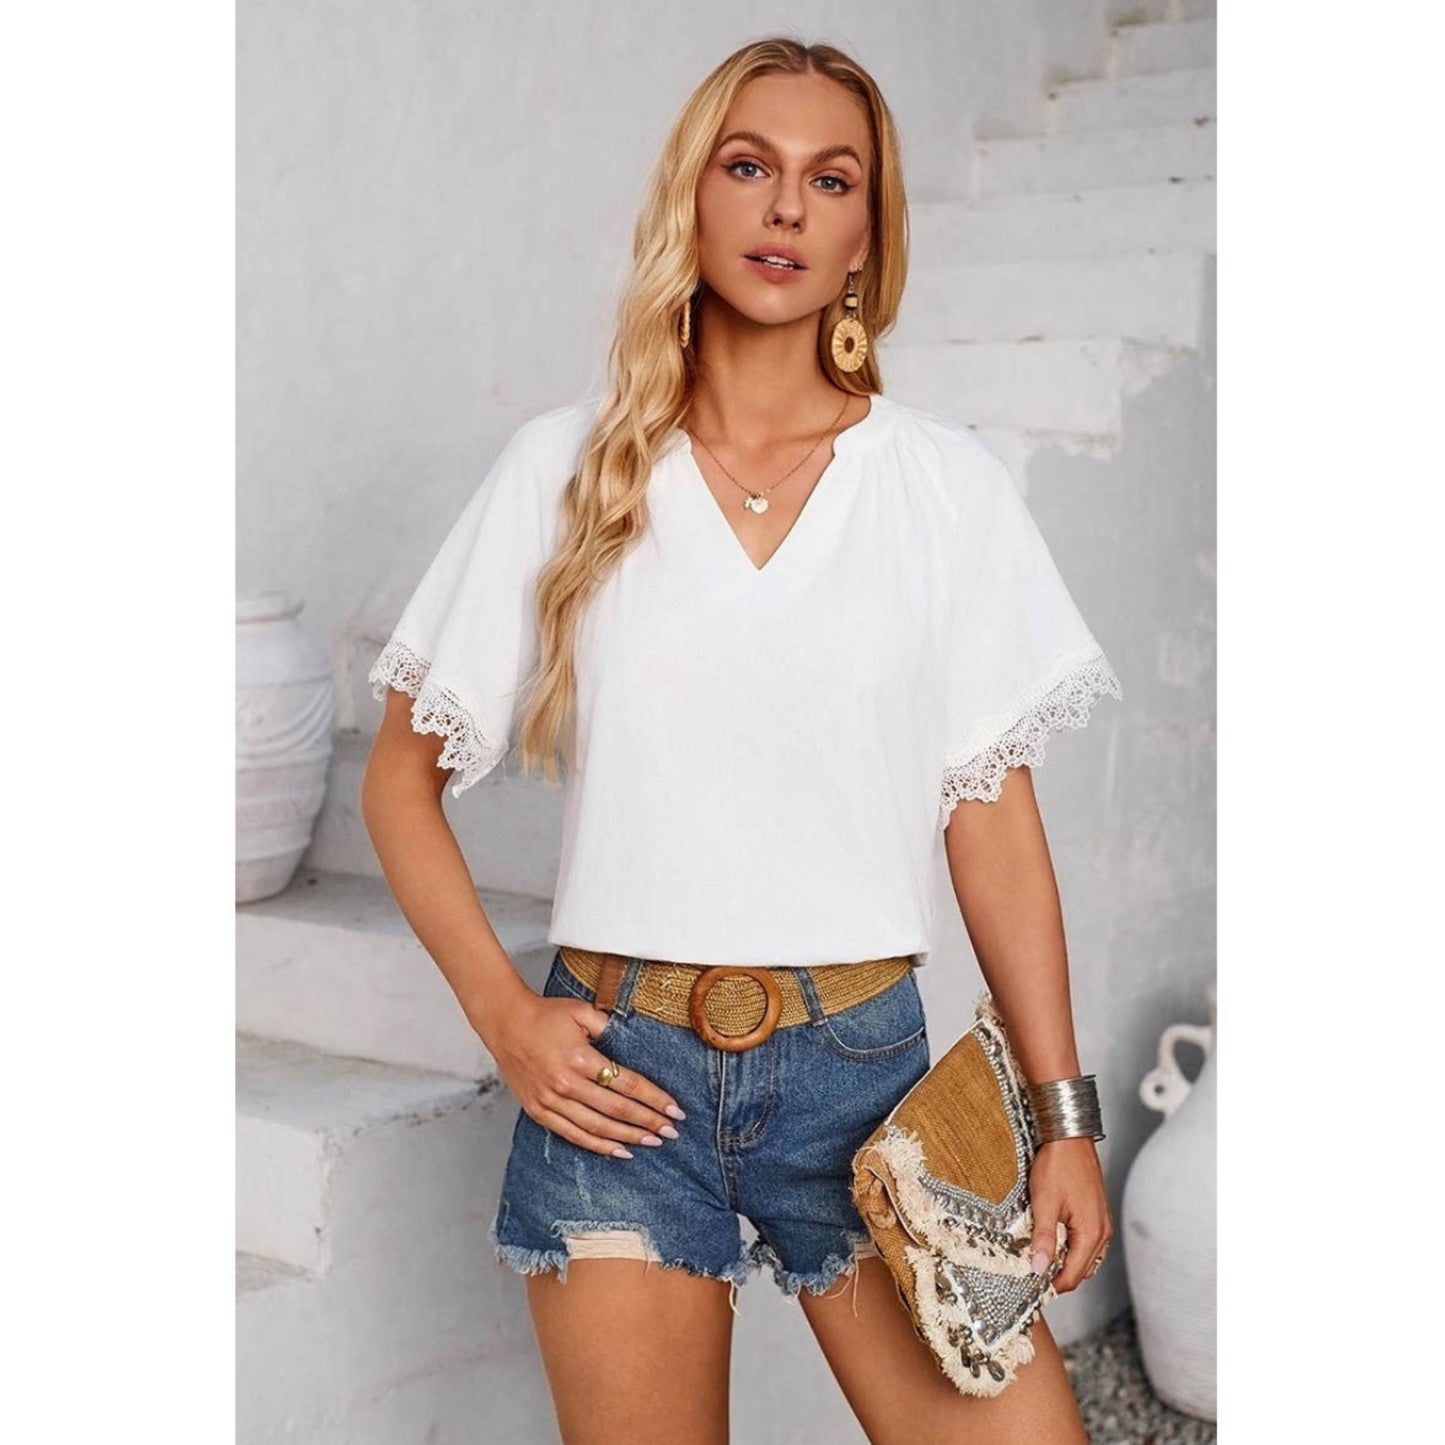 Solid V Neck White Summer Blouse Short Sleeves Lace Trim